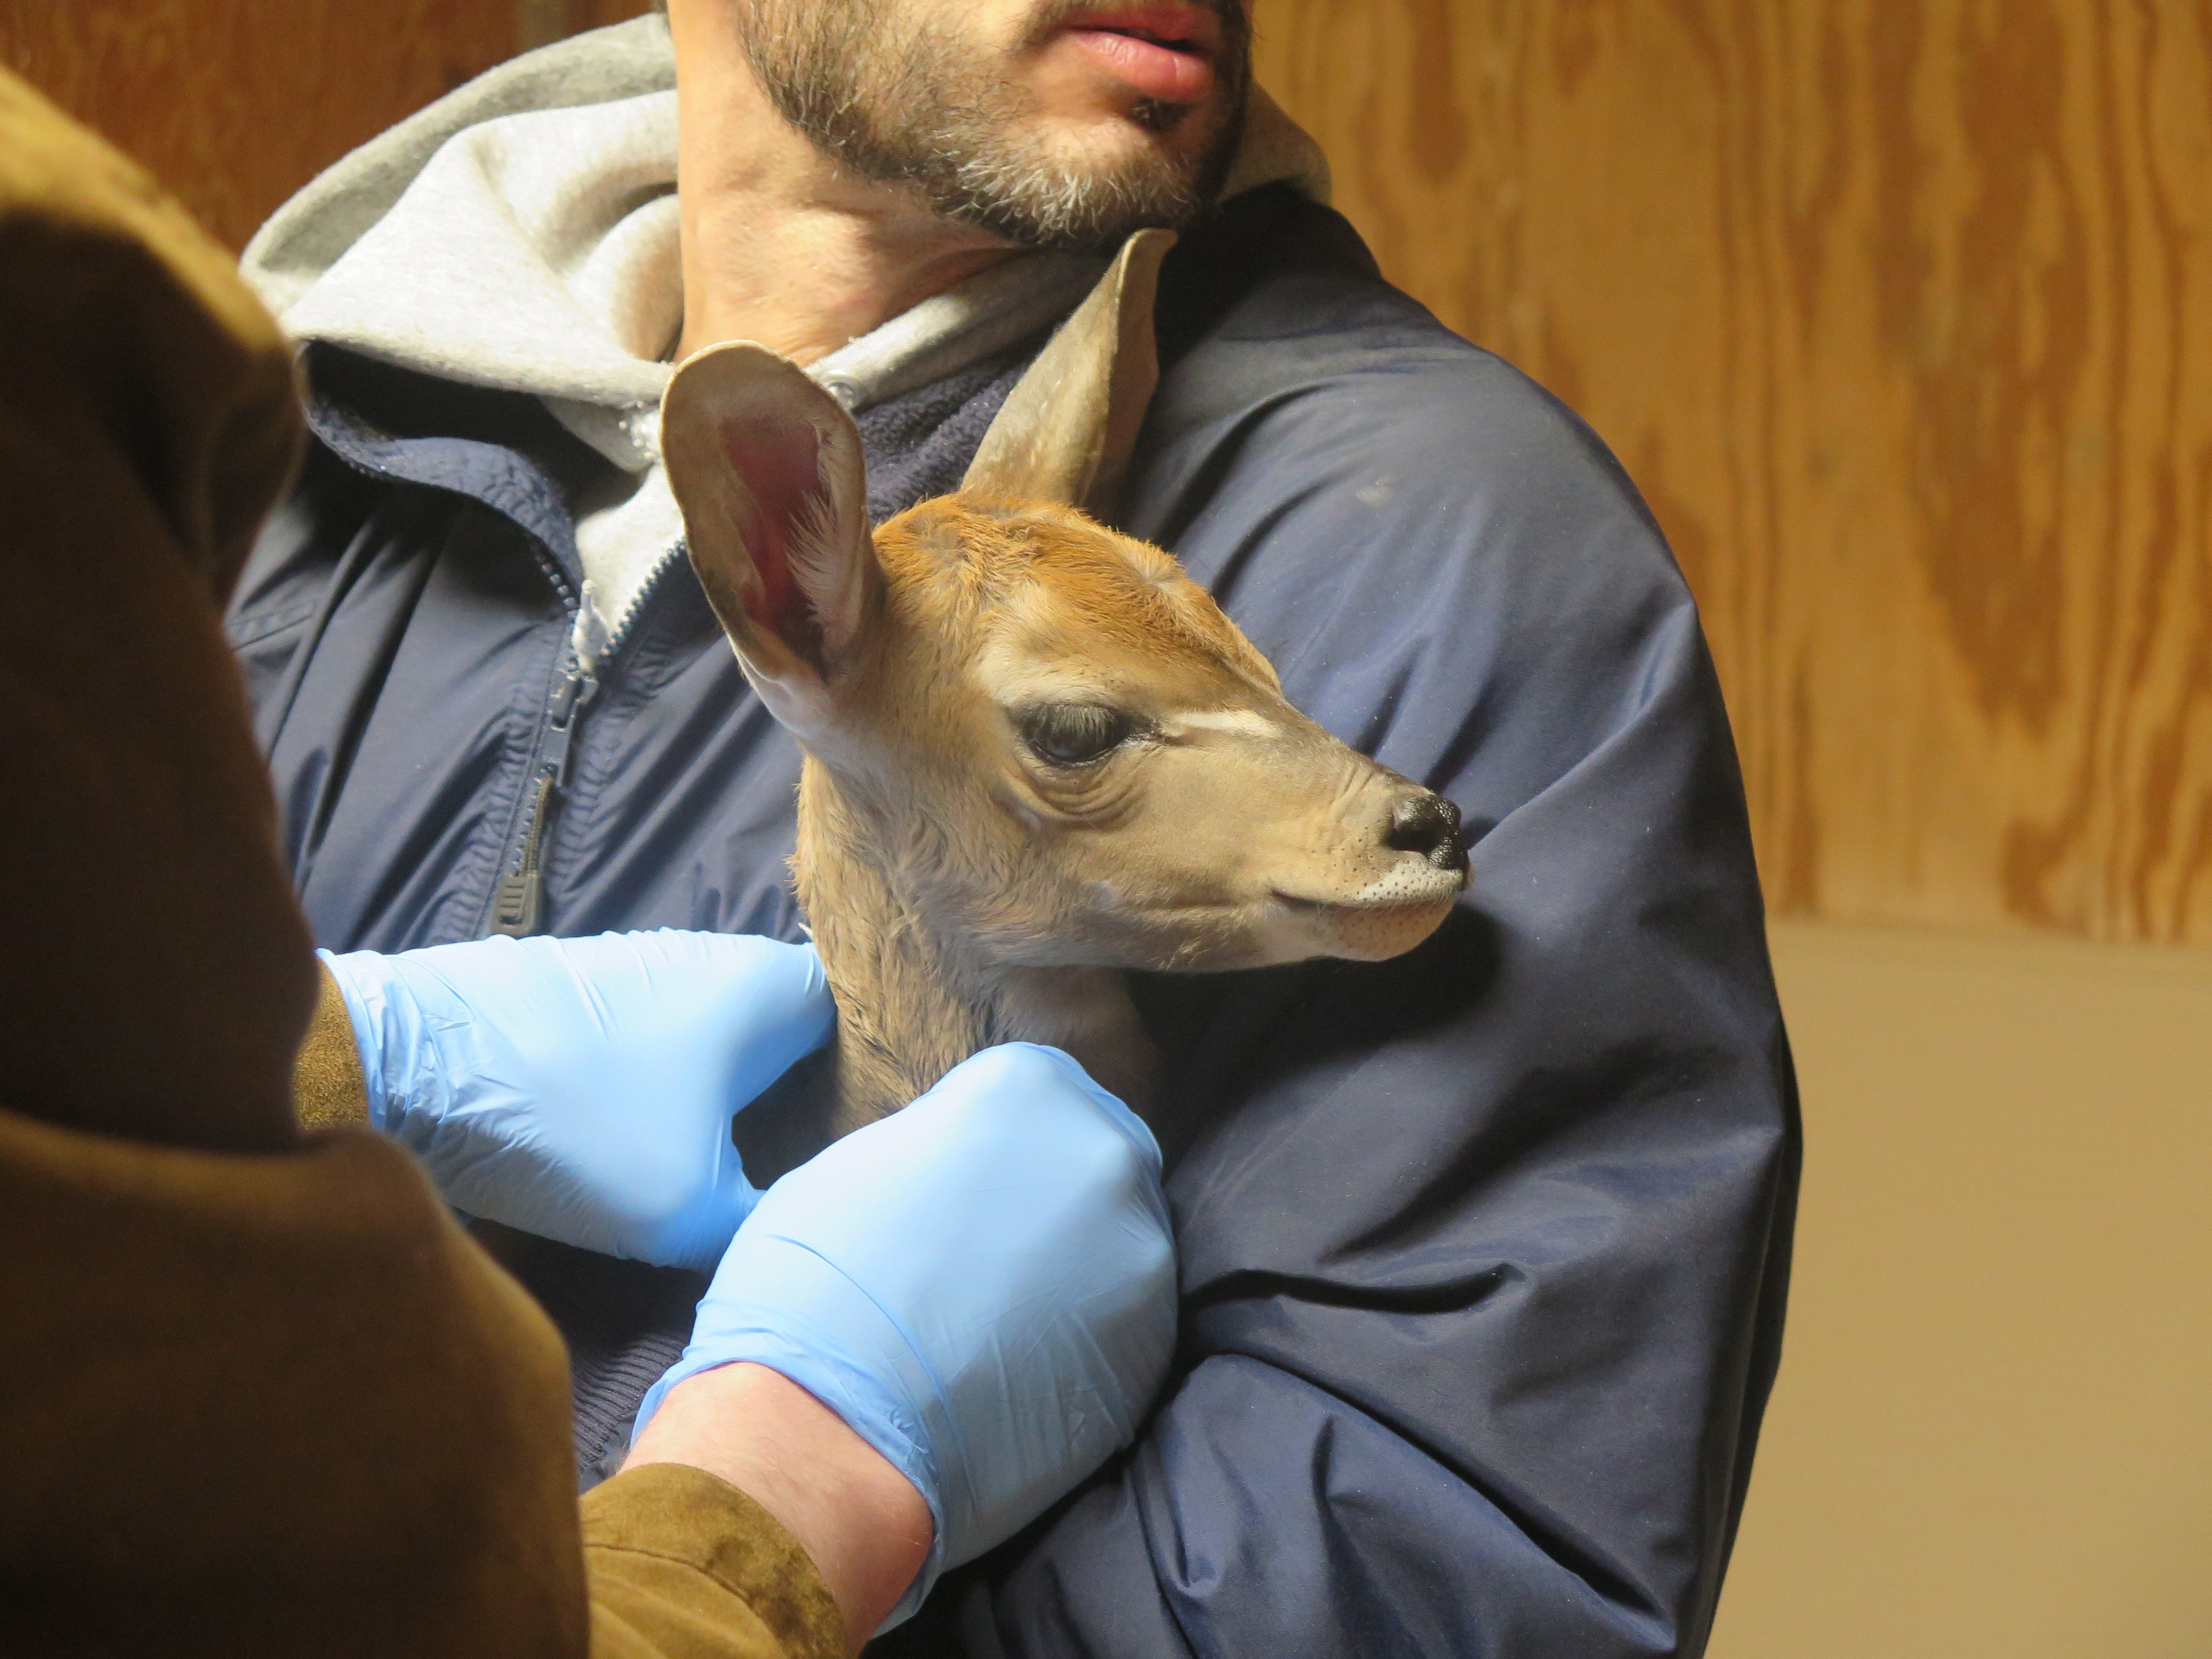 A kudu calf being held by a zookeeper while a veterinarian examines it